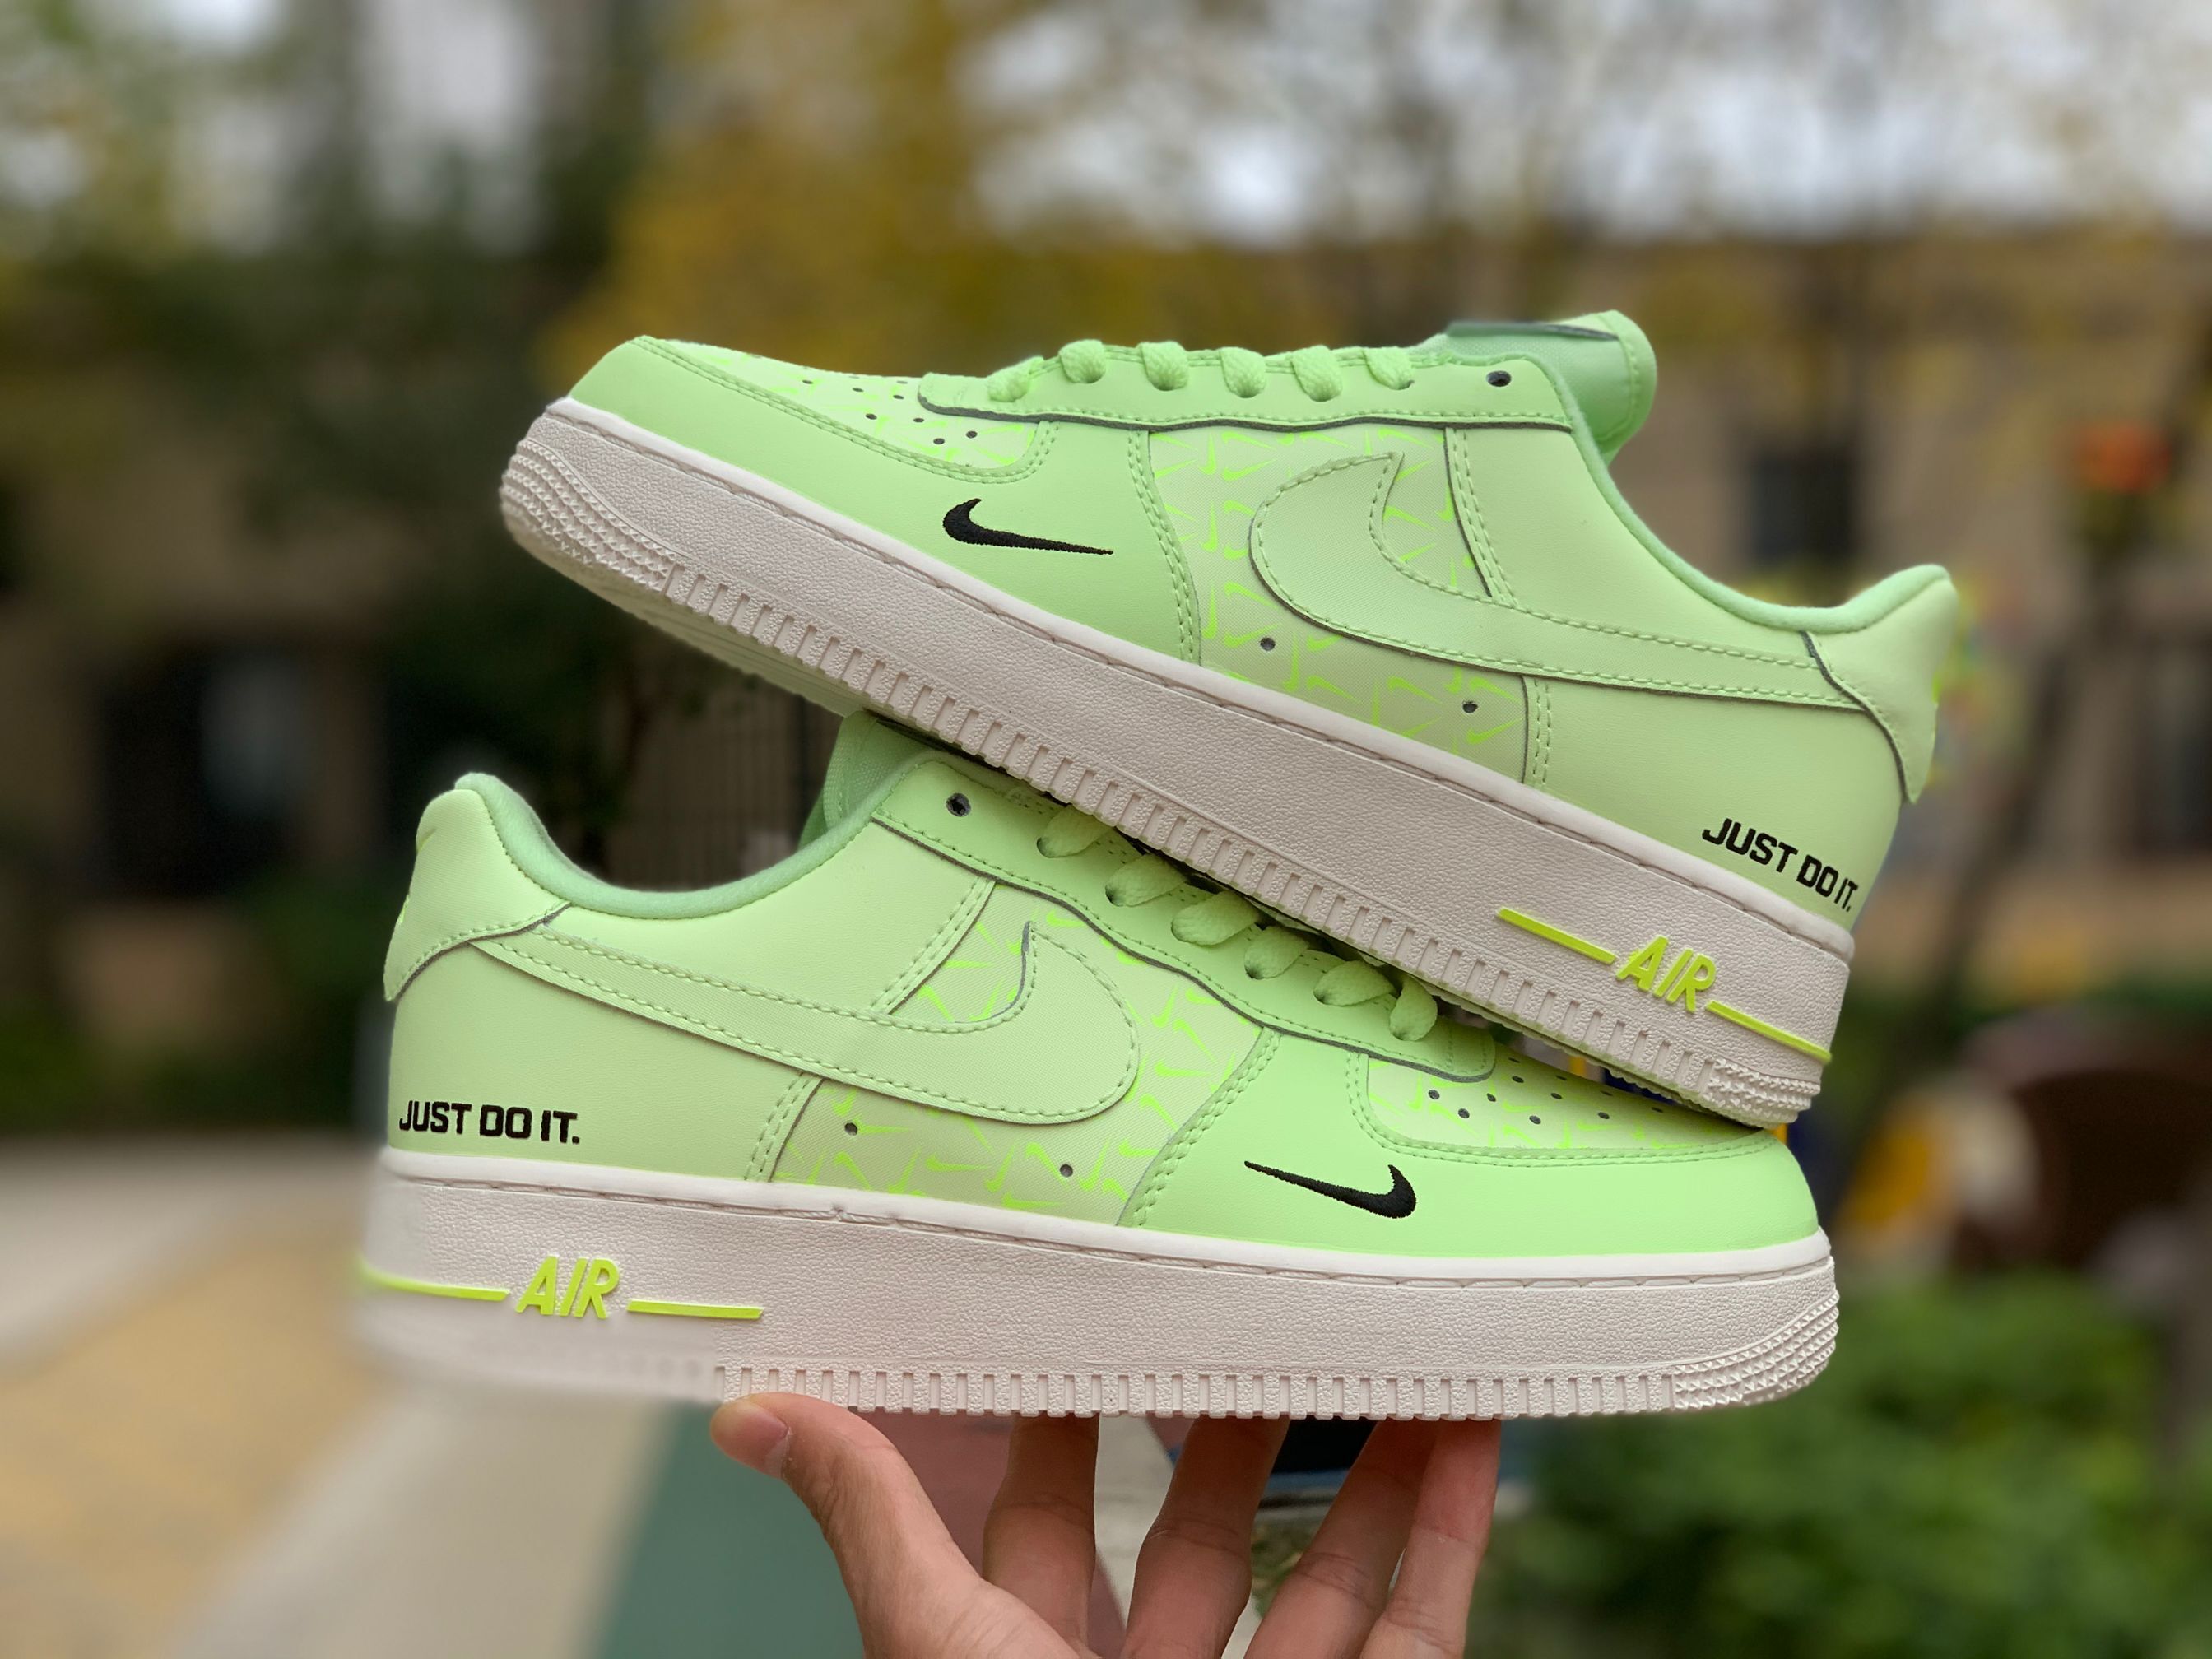 2020 Nike Air 1 Low Just Do It Neon Yellow CT2541 - 700 For Sale - nike roshe graphics men shoes sale